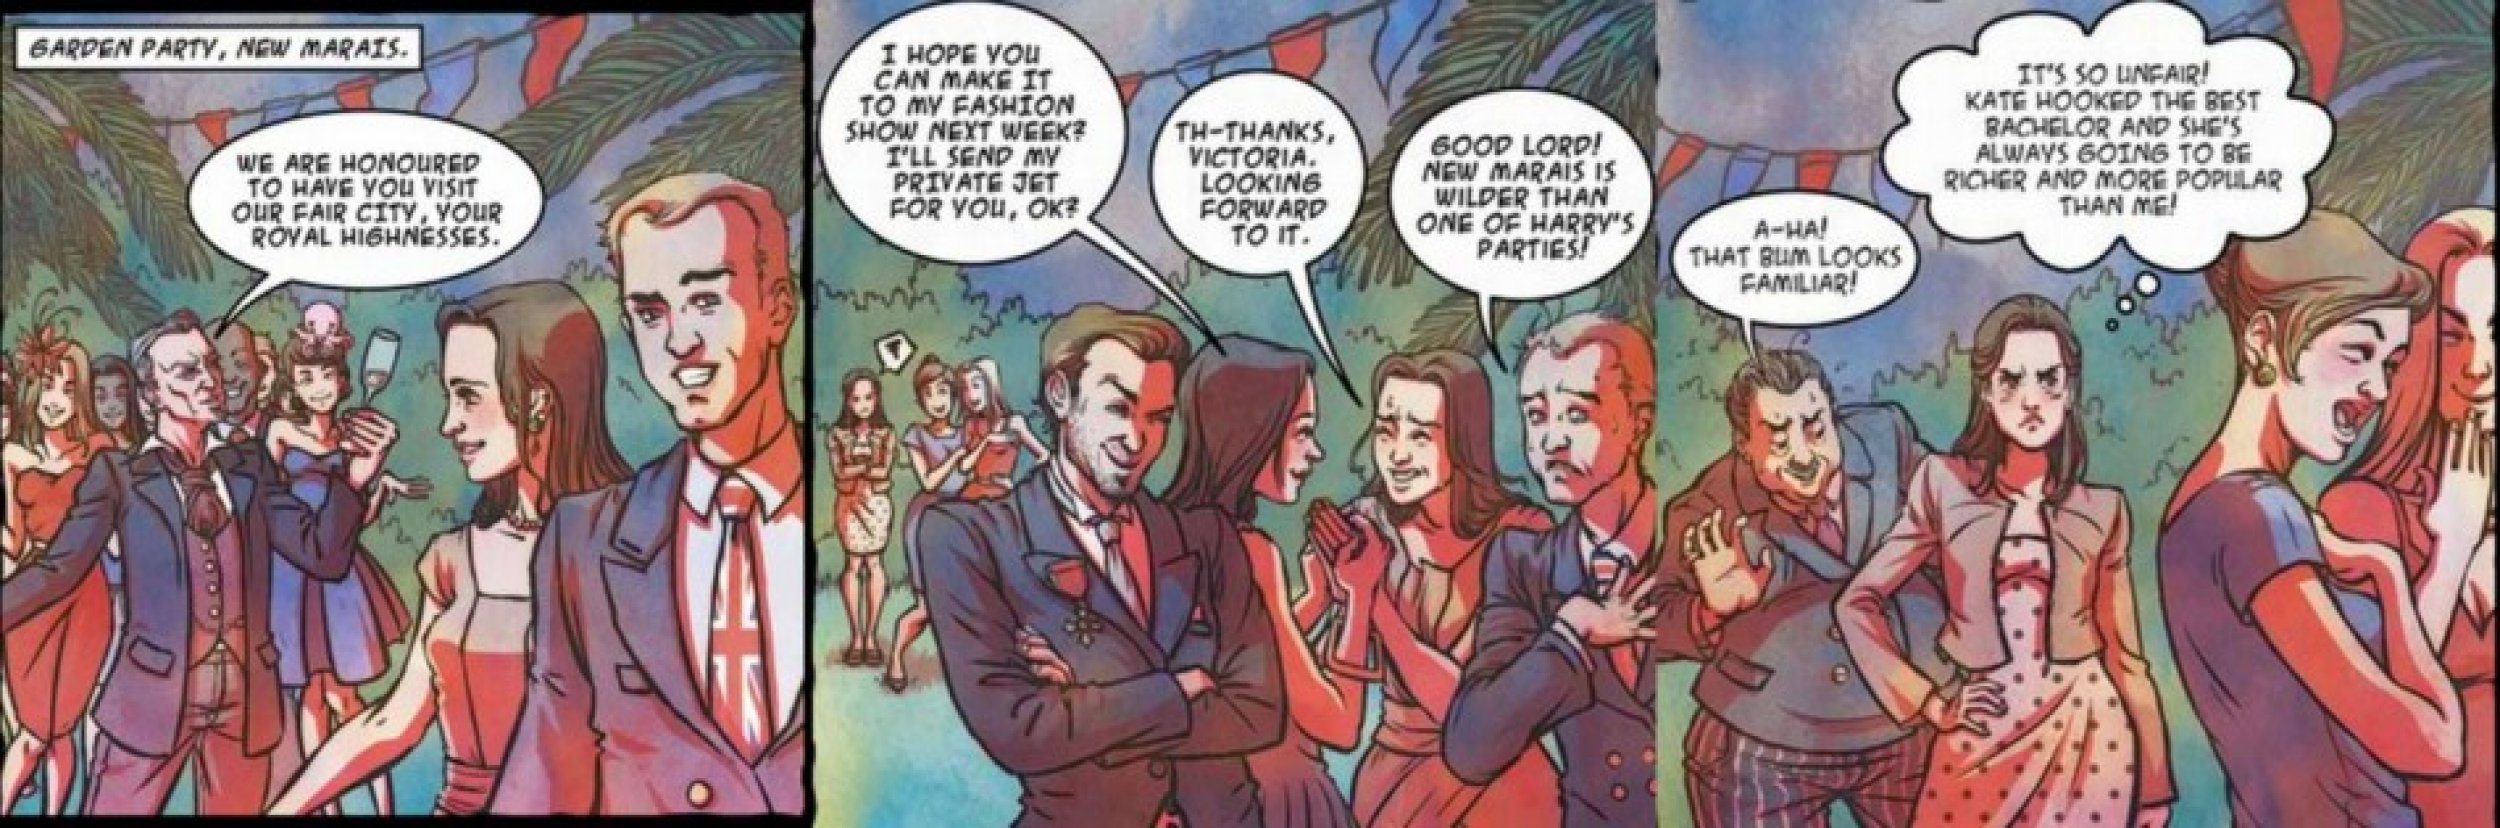 Pippa Middleton cartoon character Comic strip promotes PSNs inFAMOUS2.